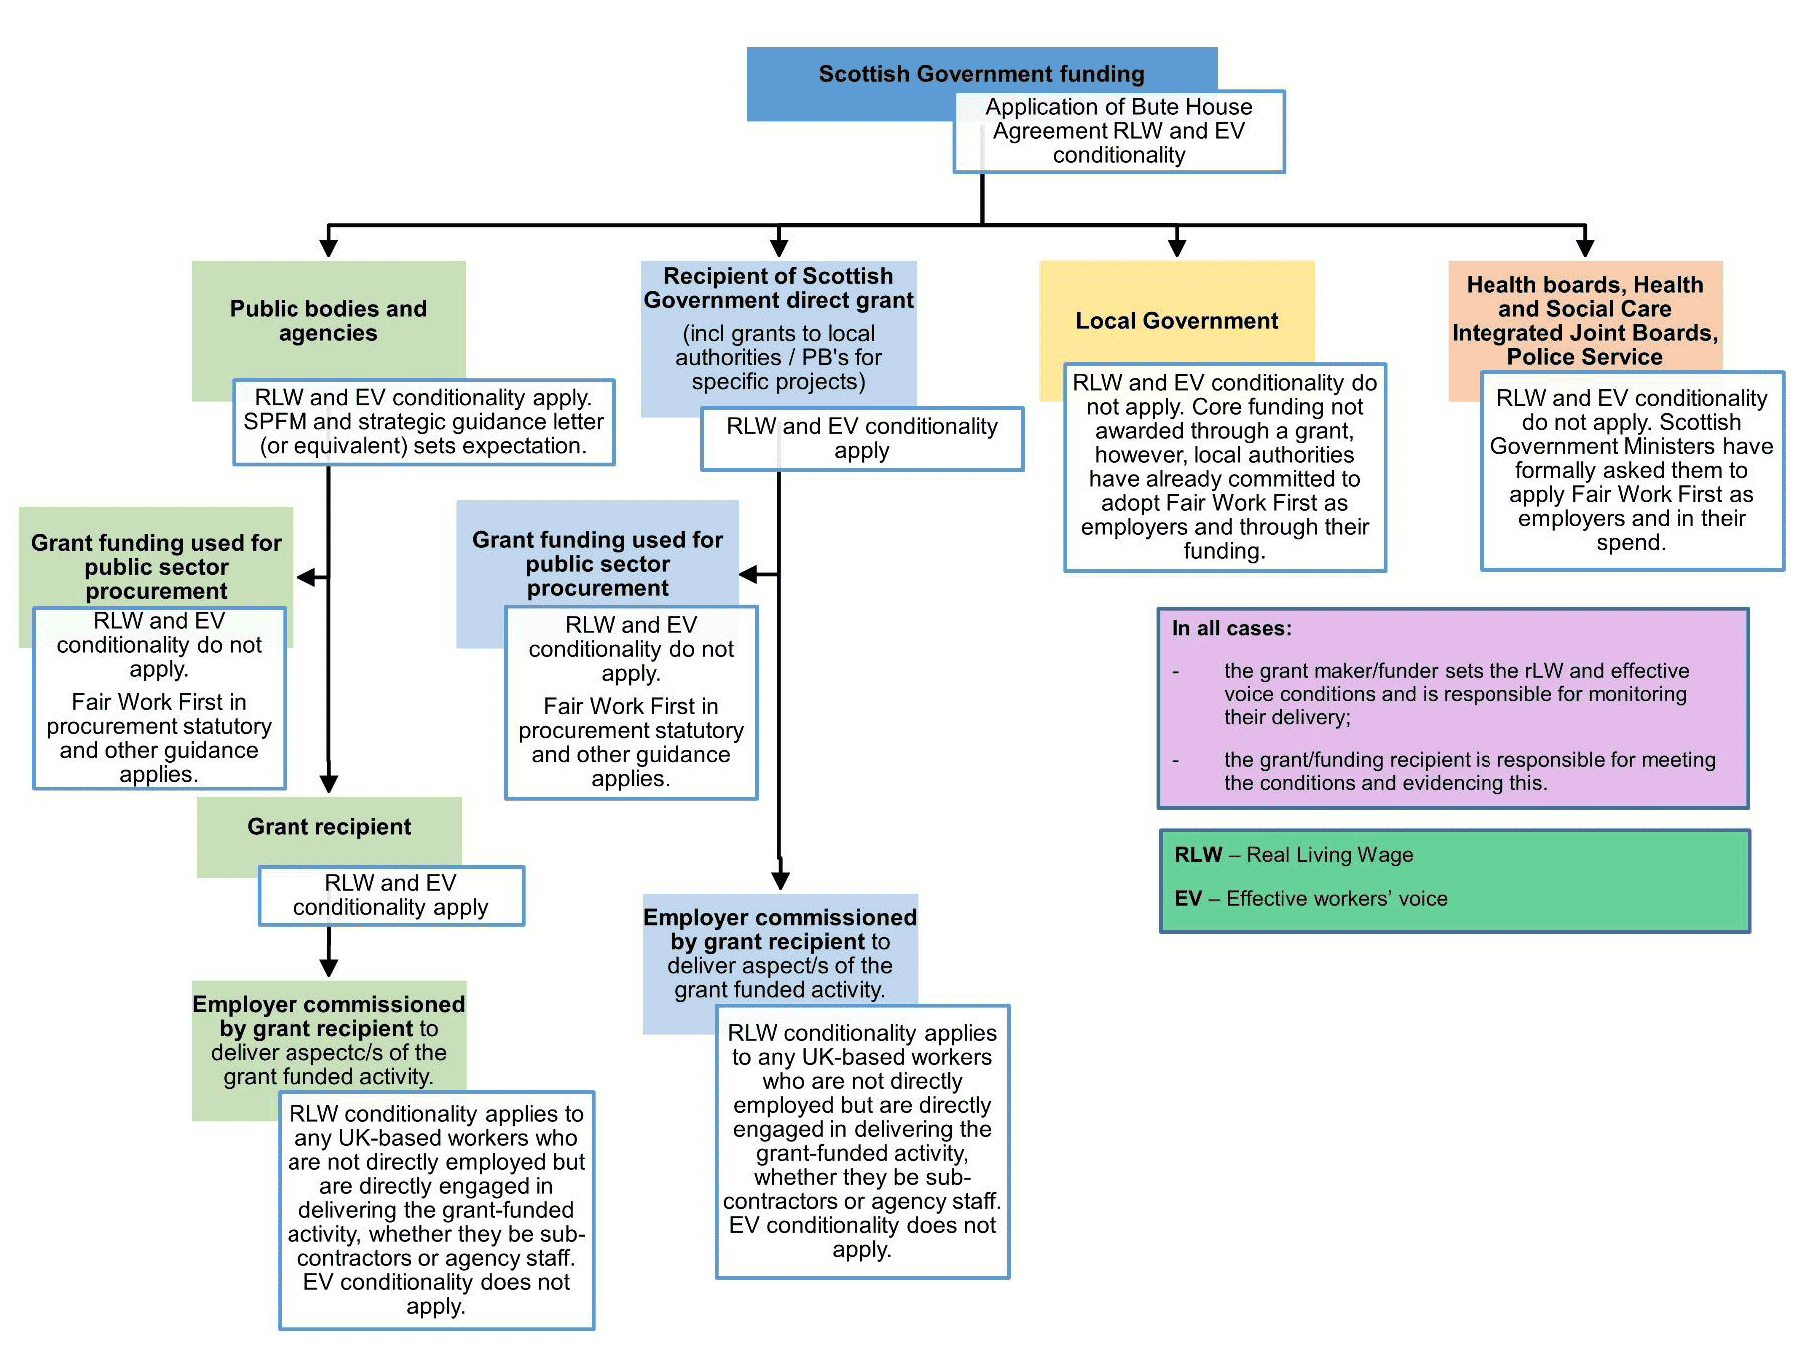 The flowchart illustrates how the conditions to pay at least the real Living Wage and provide effective workers’ voice in public sector grants can be applied not just to the grant recipient but down through a supply chain (if there is one).